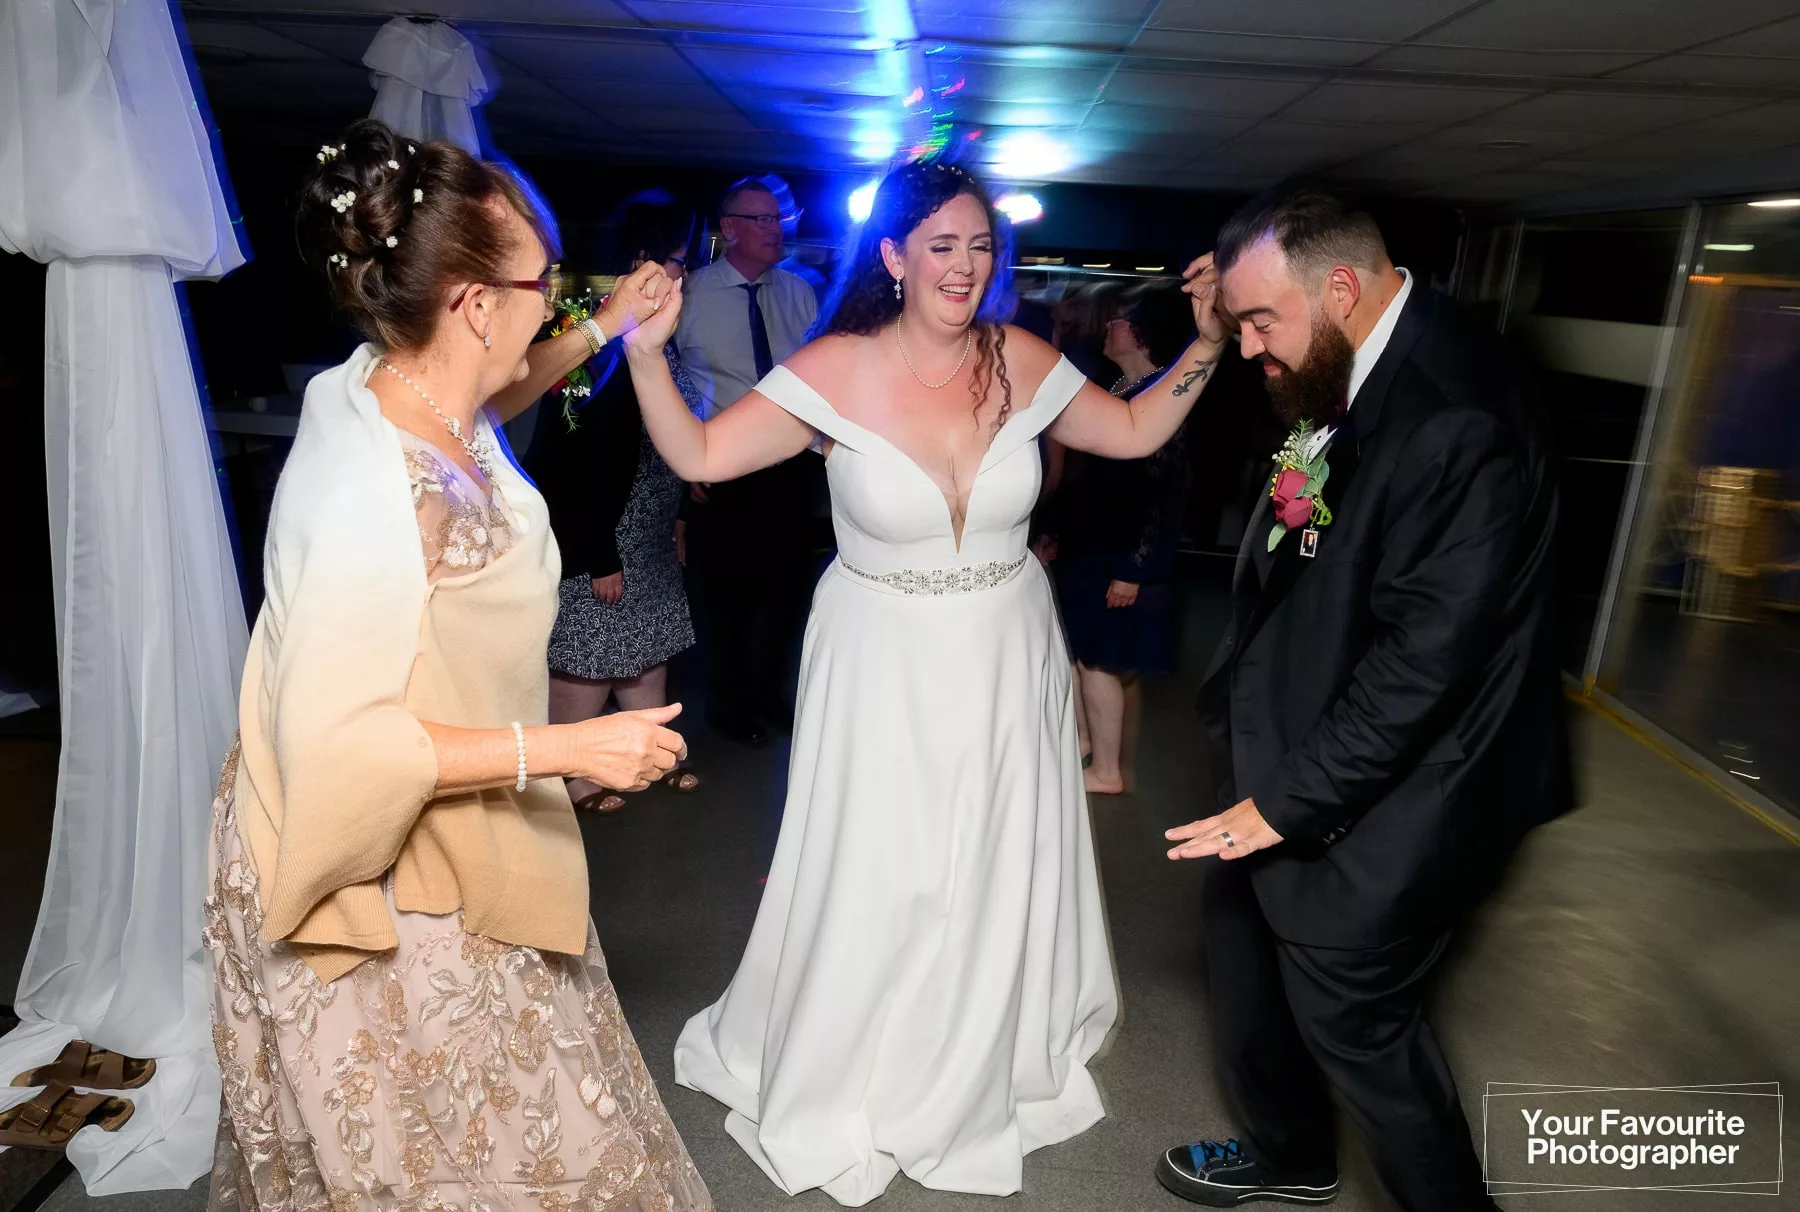 Bride and groom dancing during a wedding reception on a boat